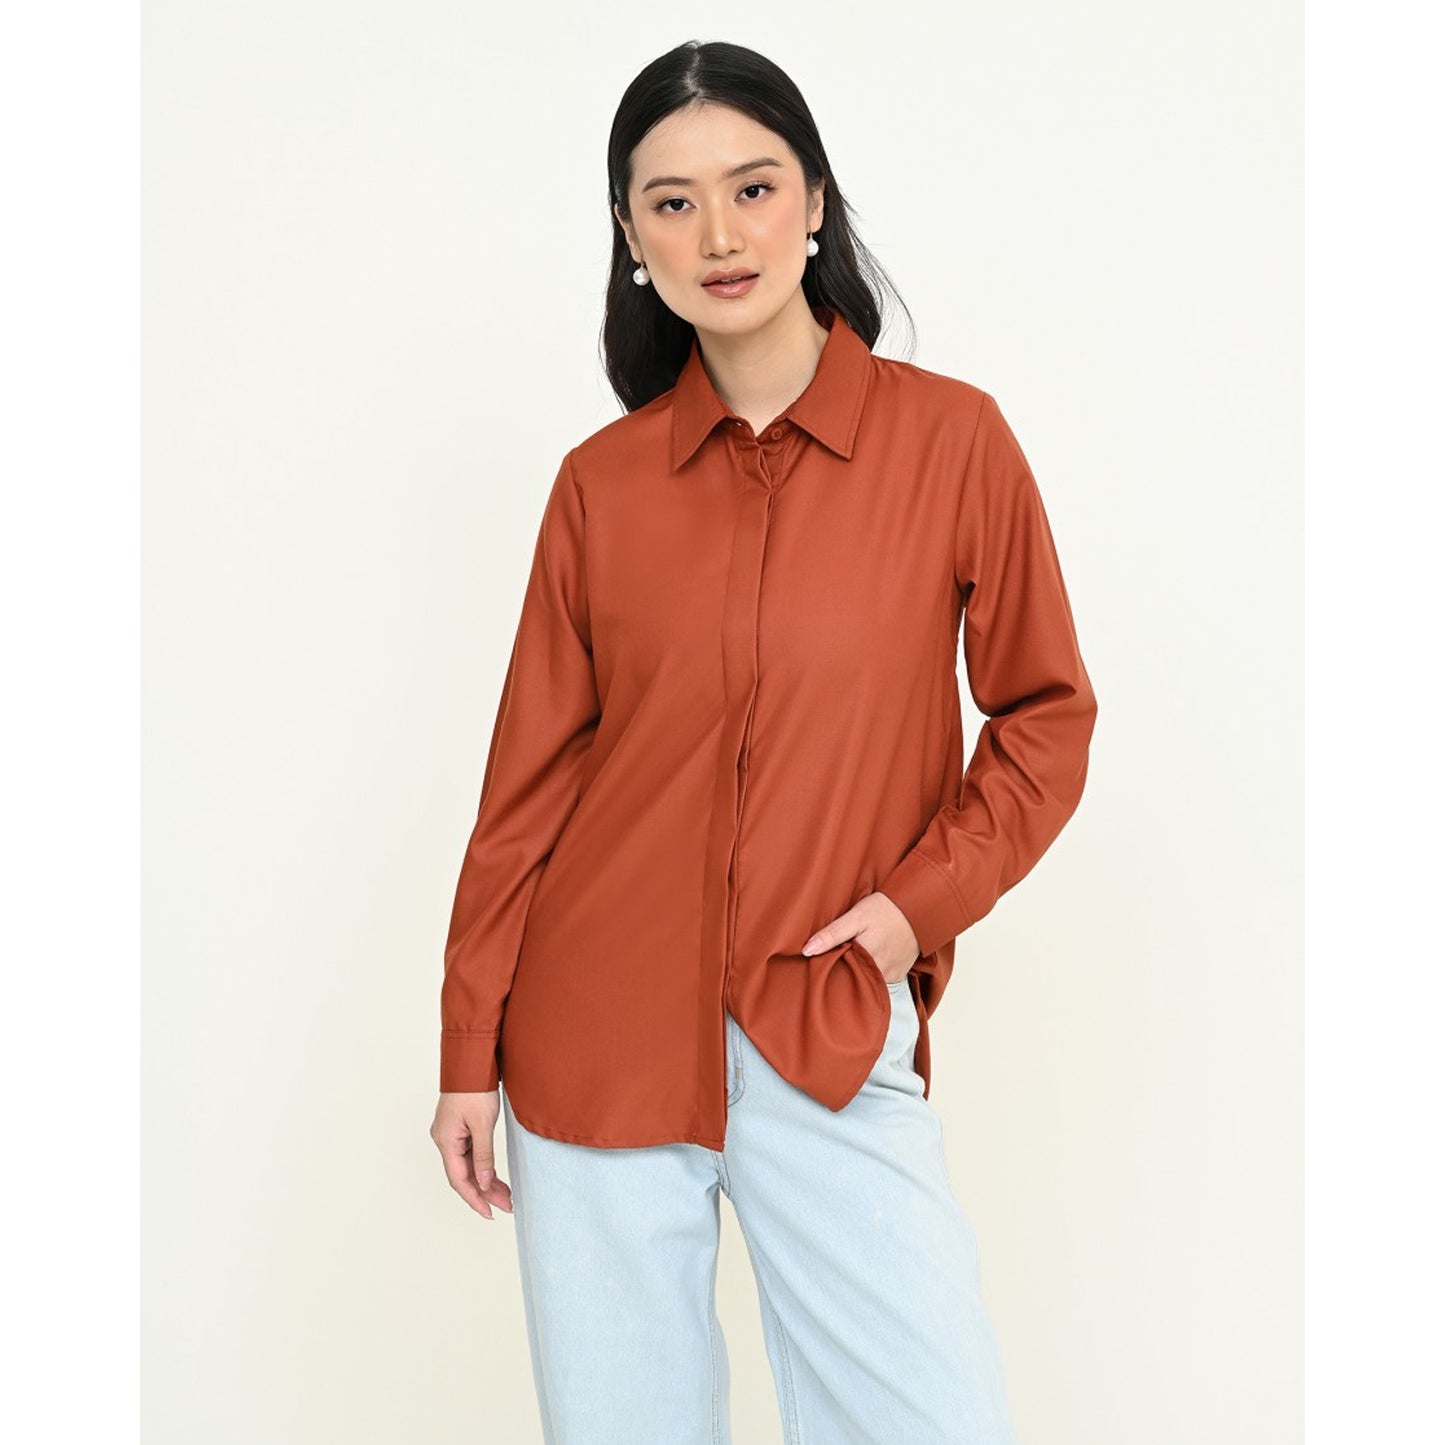 Stylish Simplicity Daily Shirt Red Series with a Variety of Colors, Women Blouse, Batik Blouse, Blouse For Women, Ethnic Dress, Women Shirt